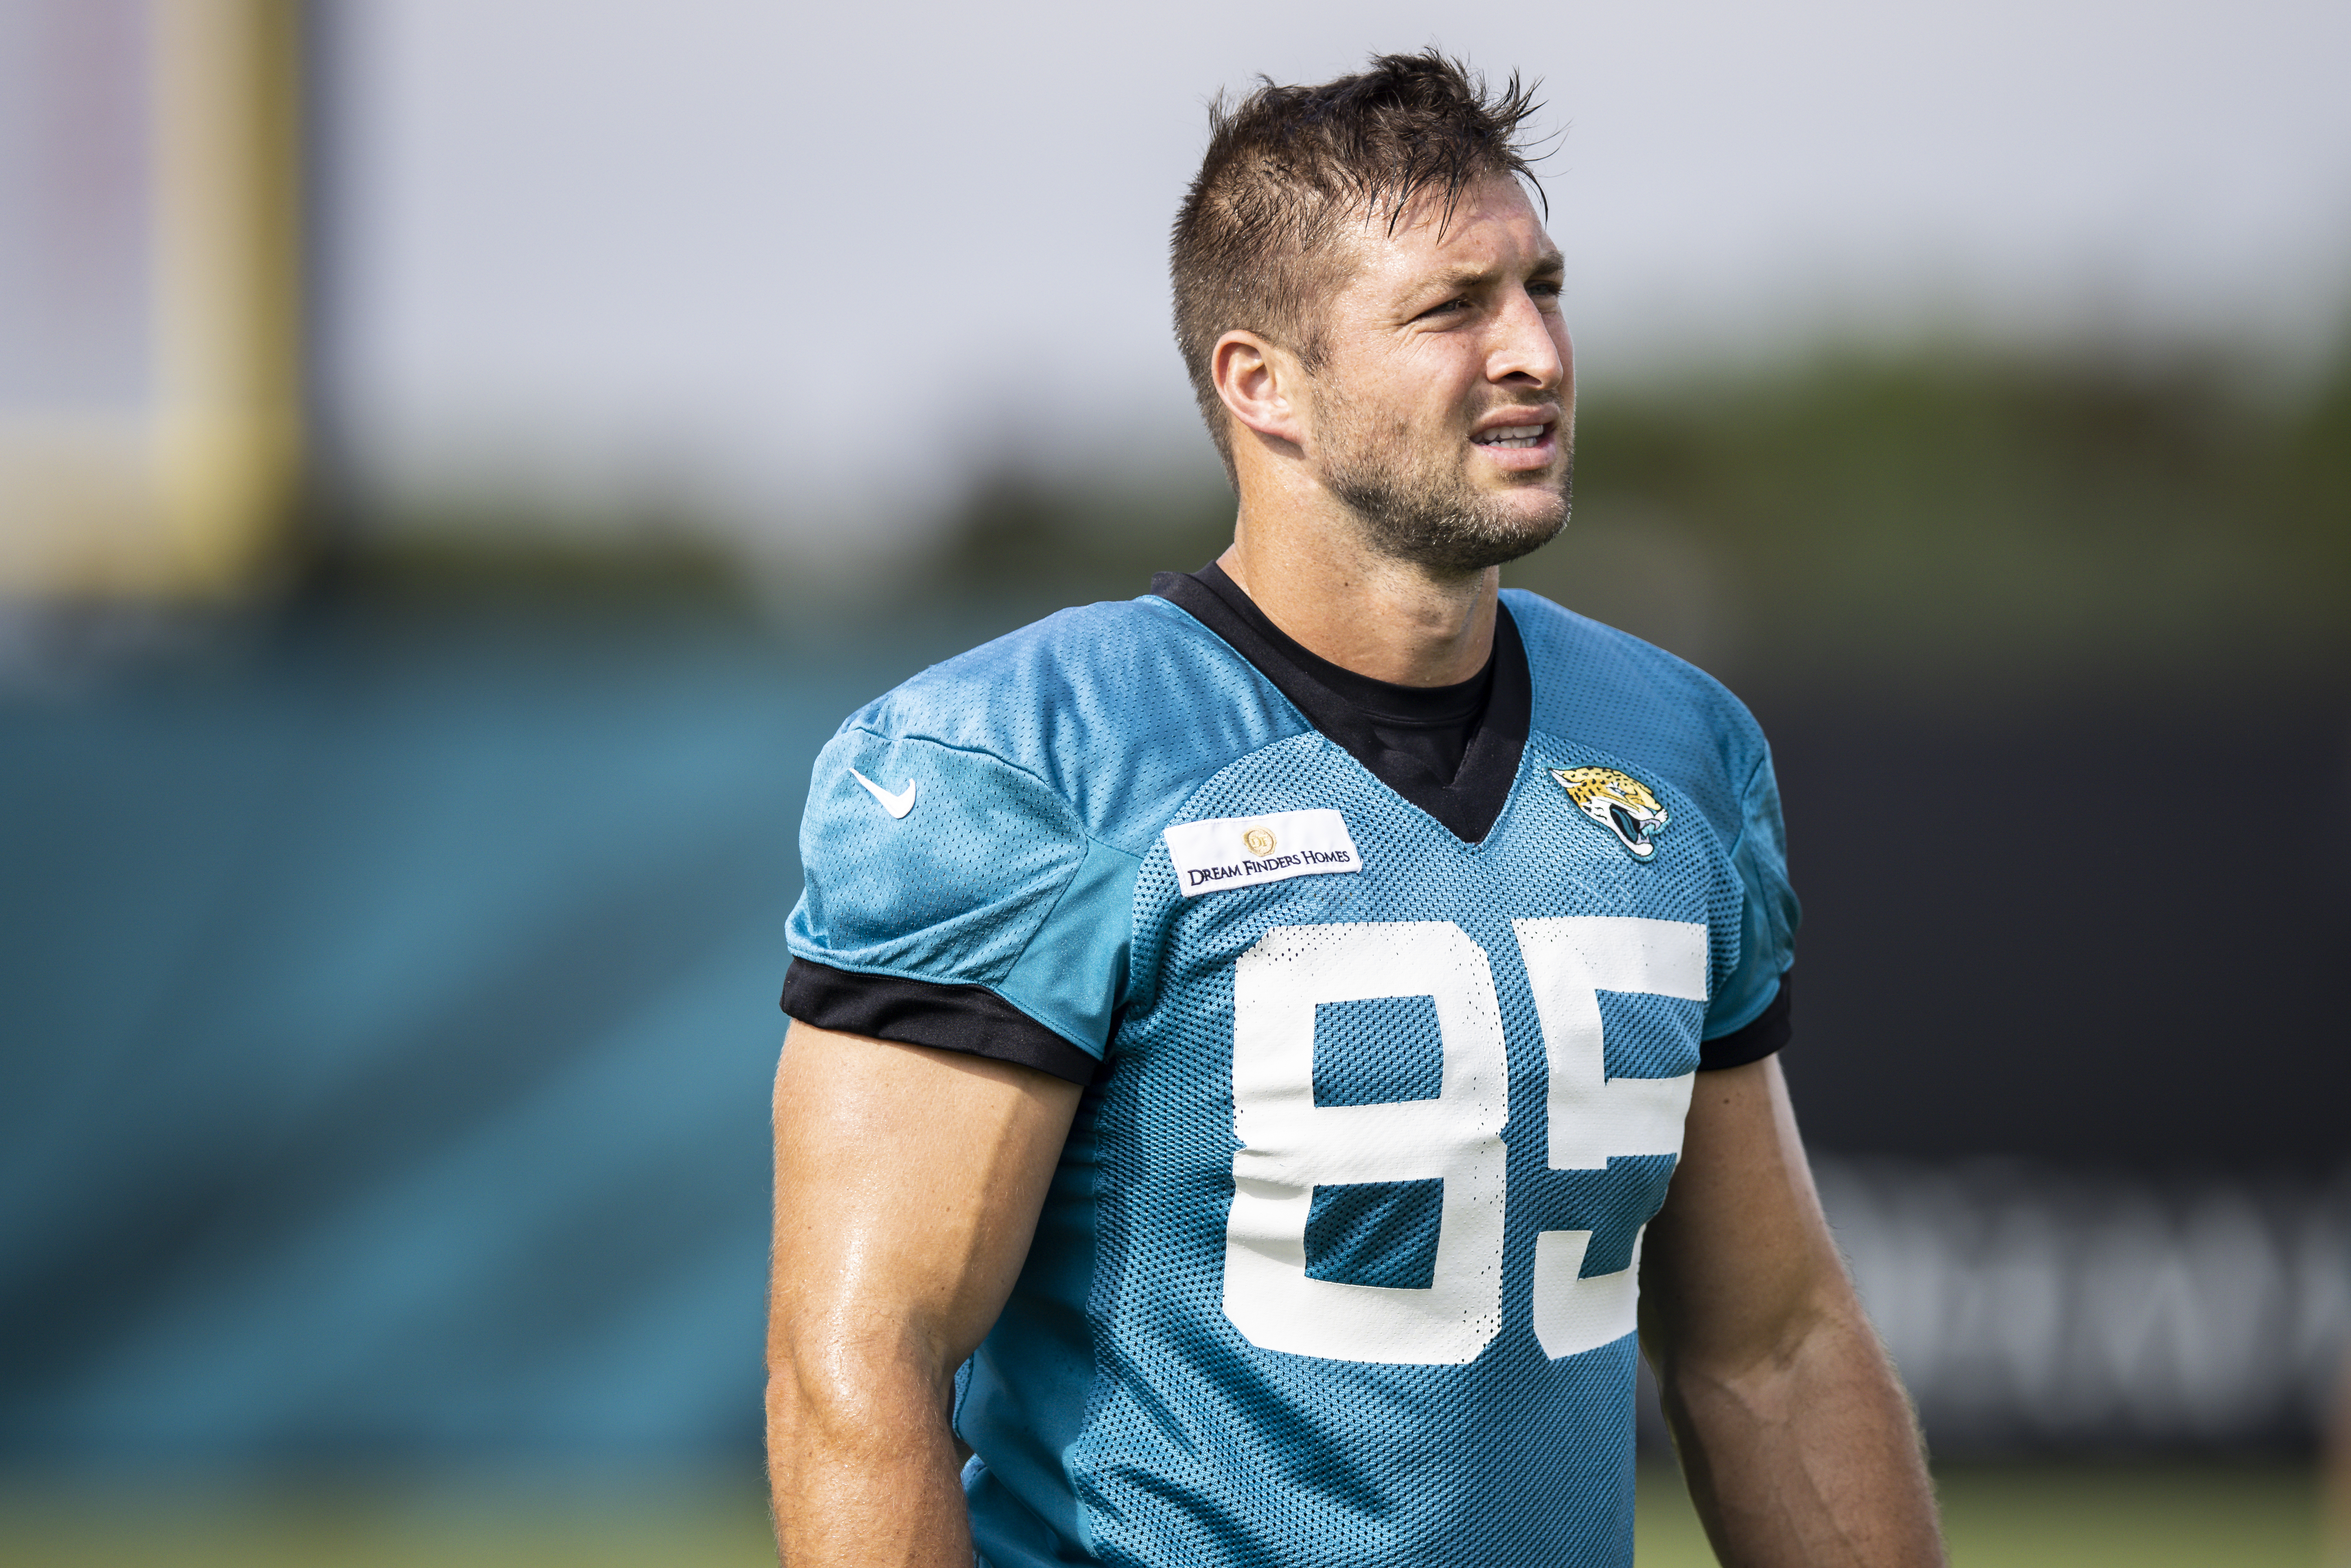 Tim Tebow on July 30, 2021 in Jacksonville, Florida | Source: Getty Images